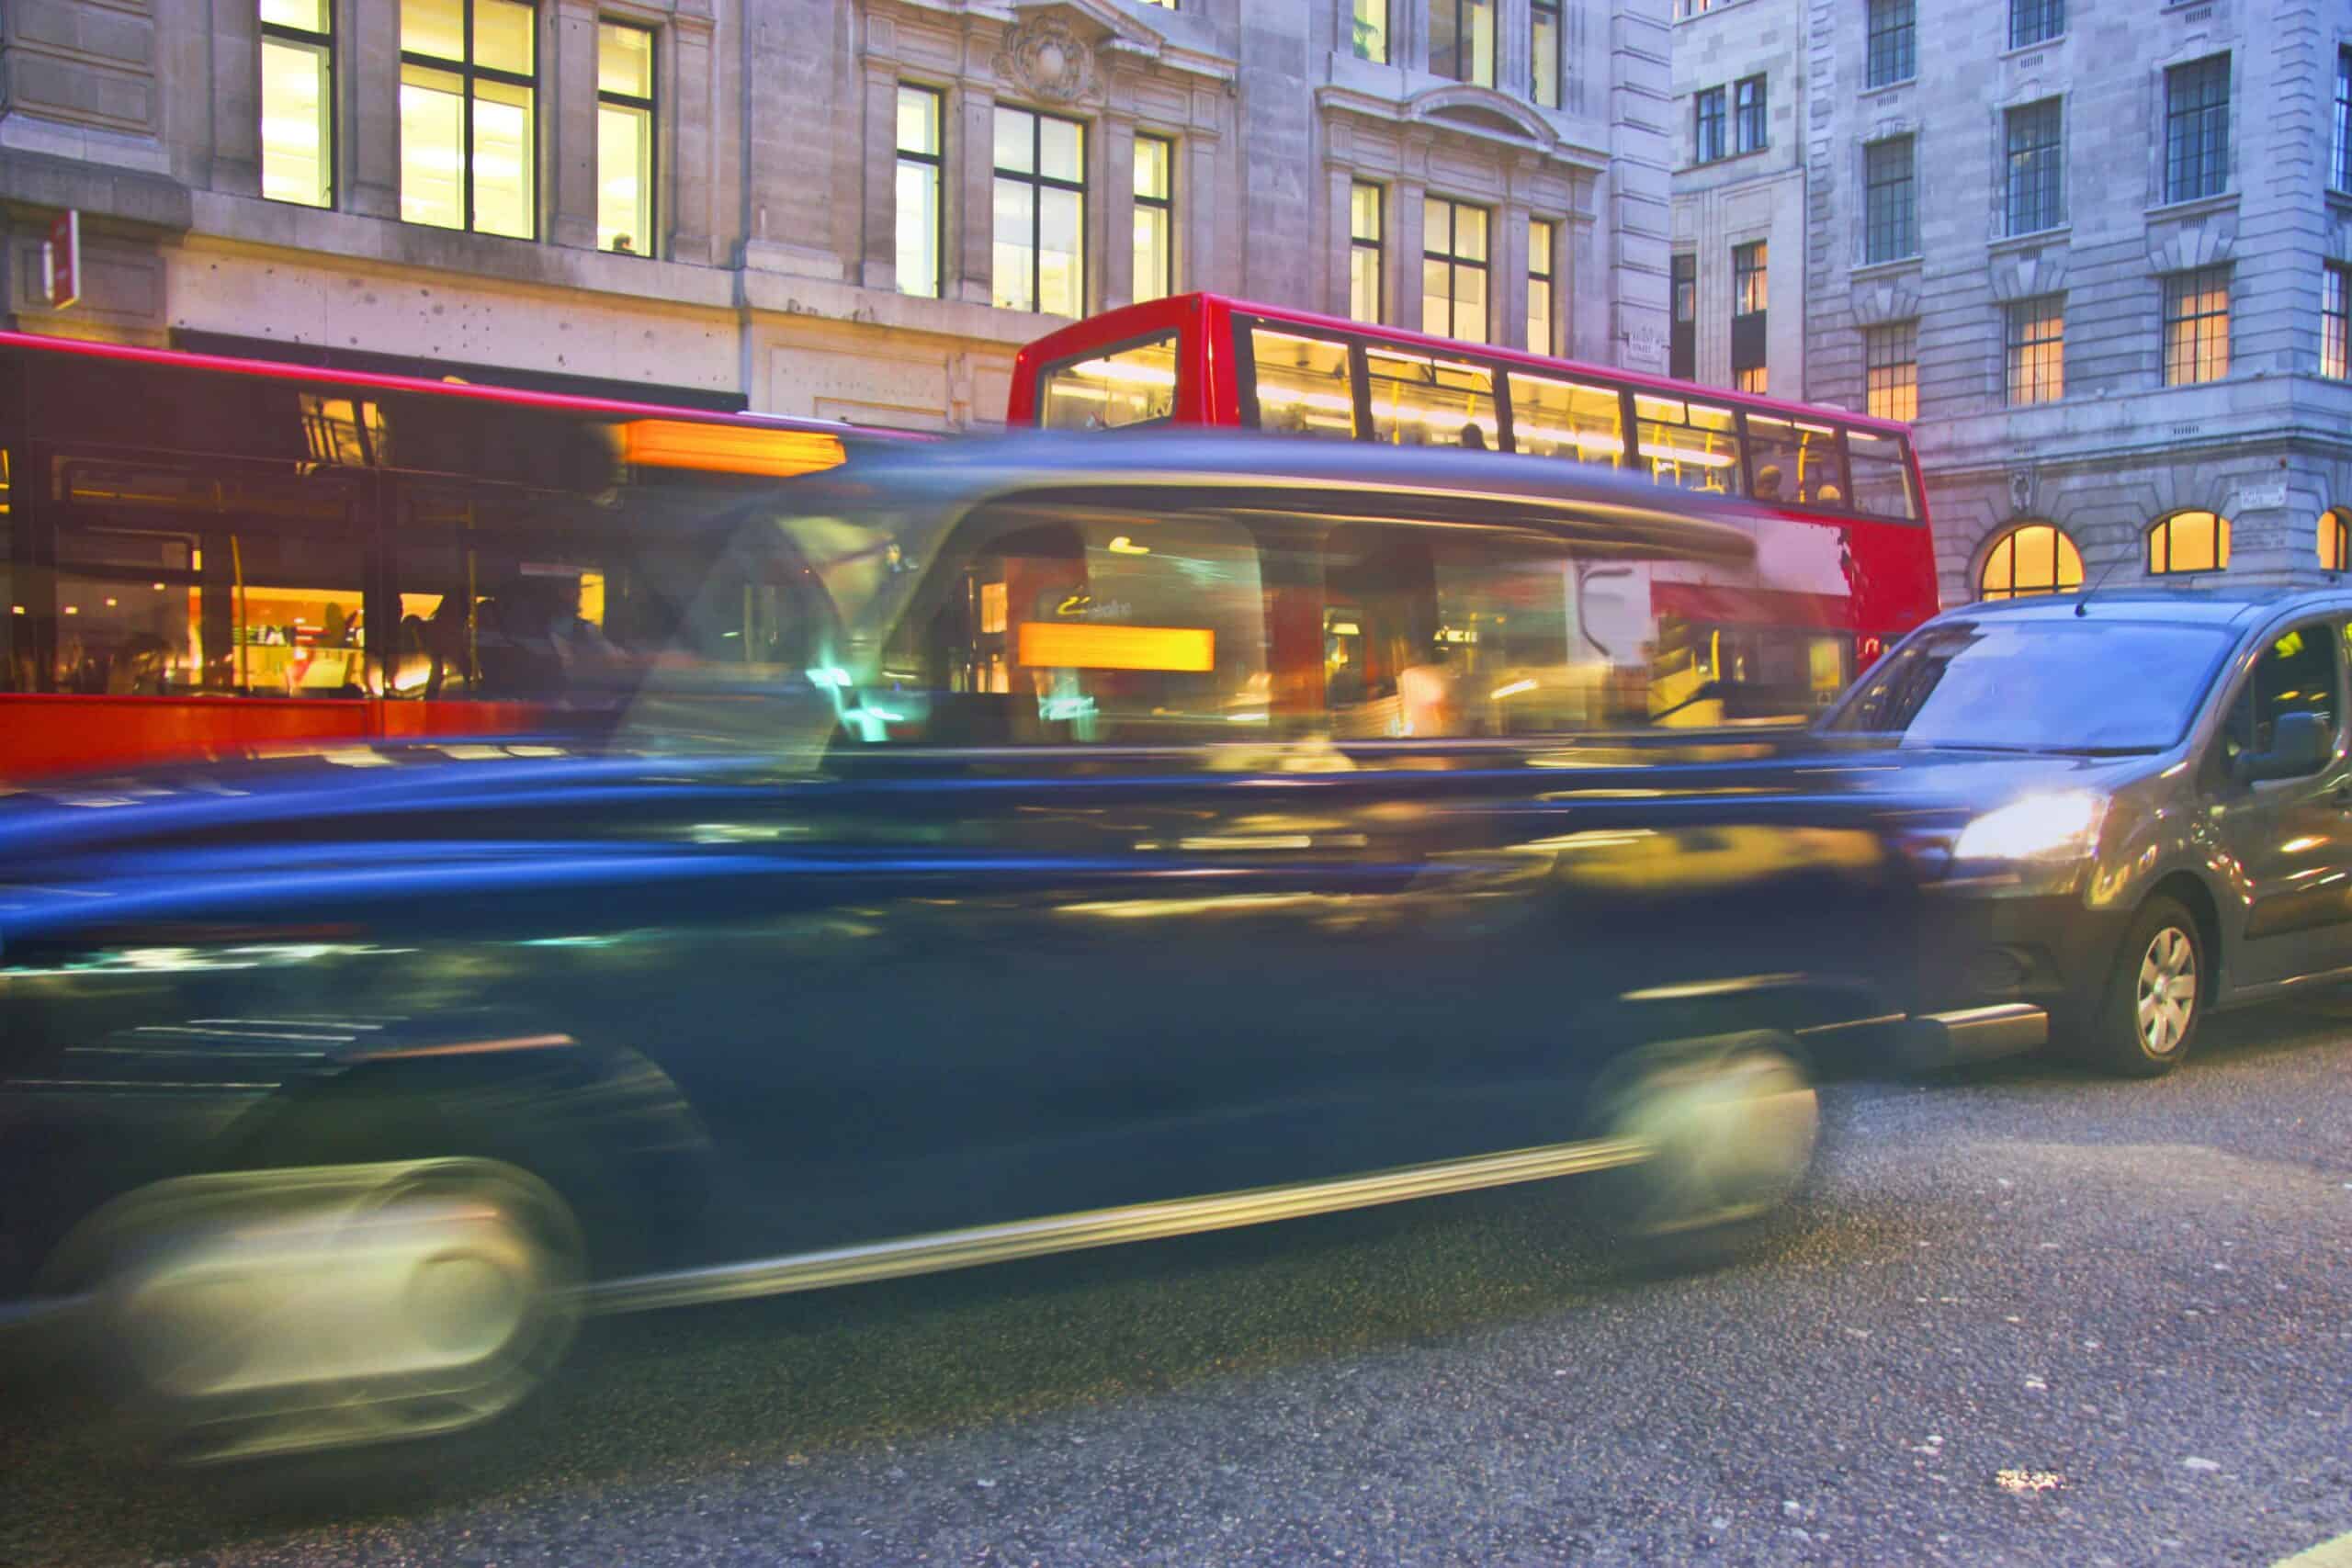 Busy streets of London, Black Taxi and. Red London Bus driving on a London Road.